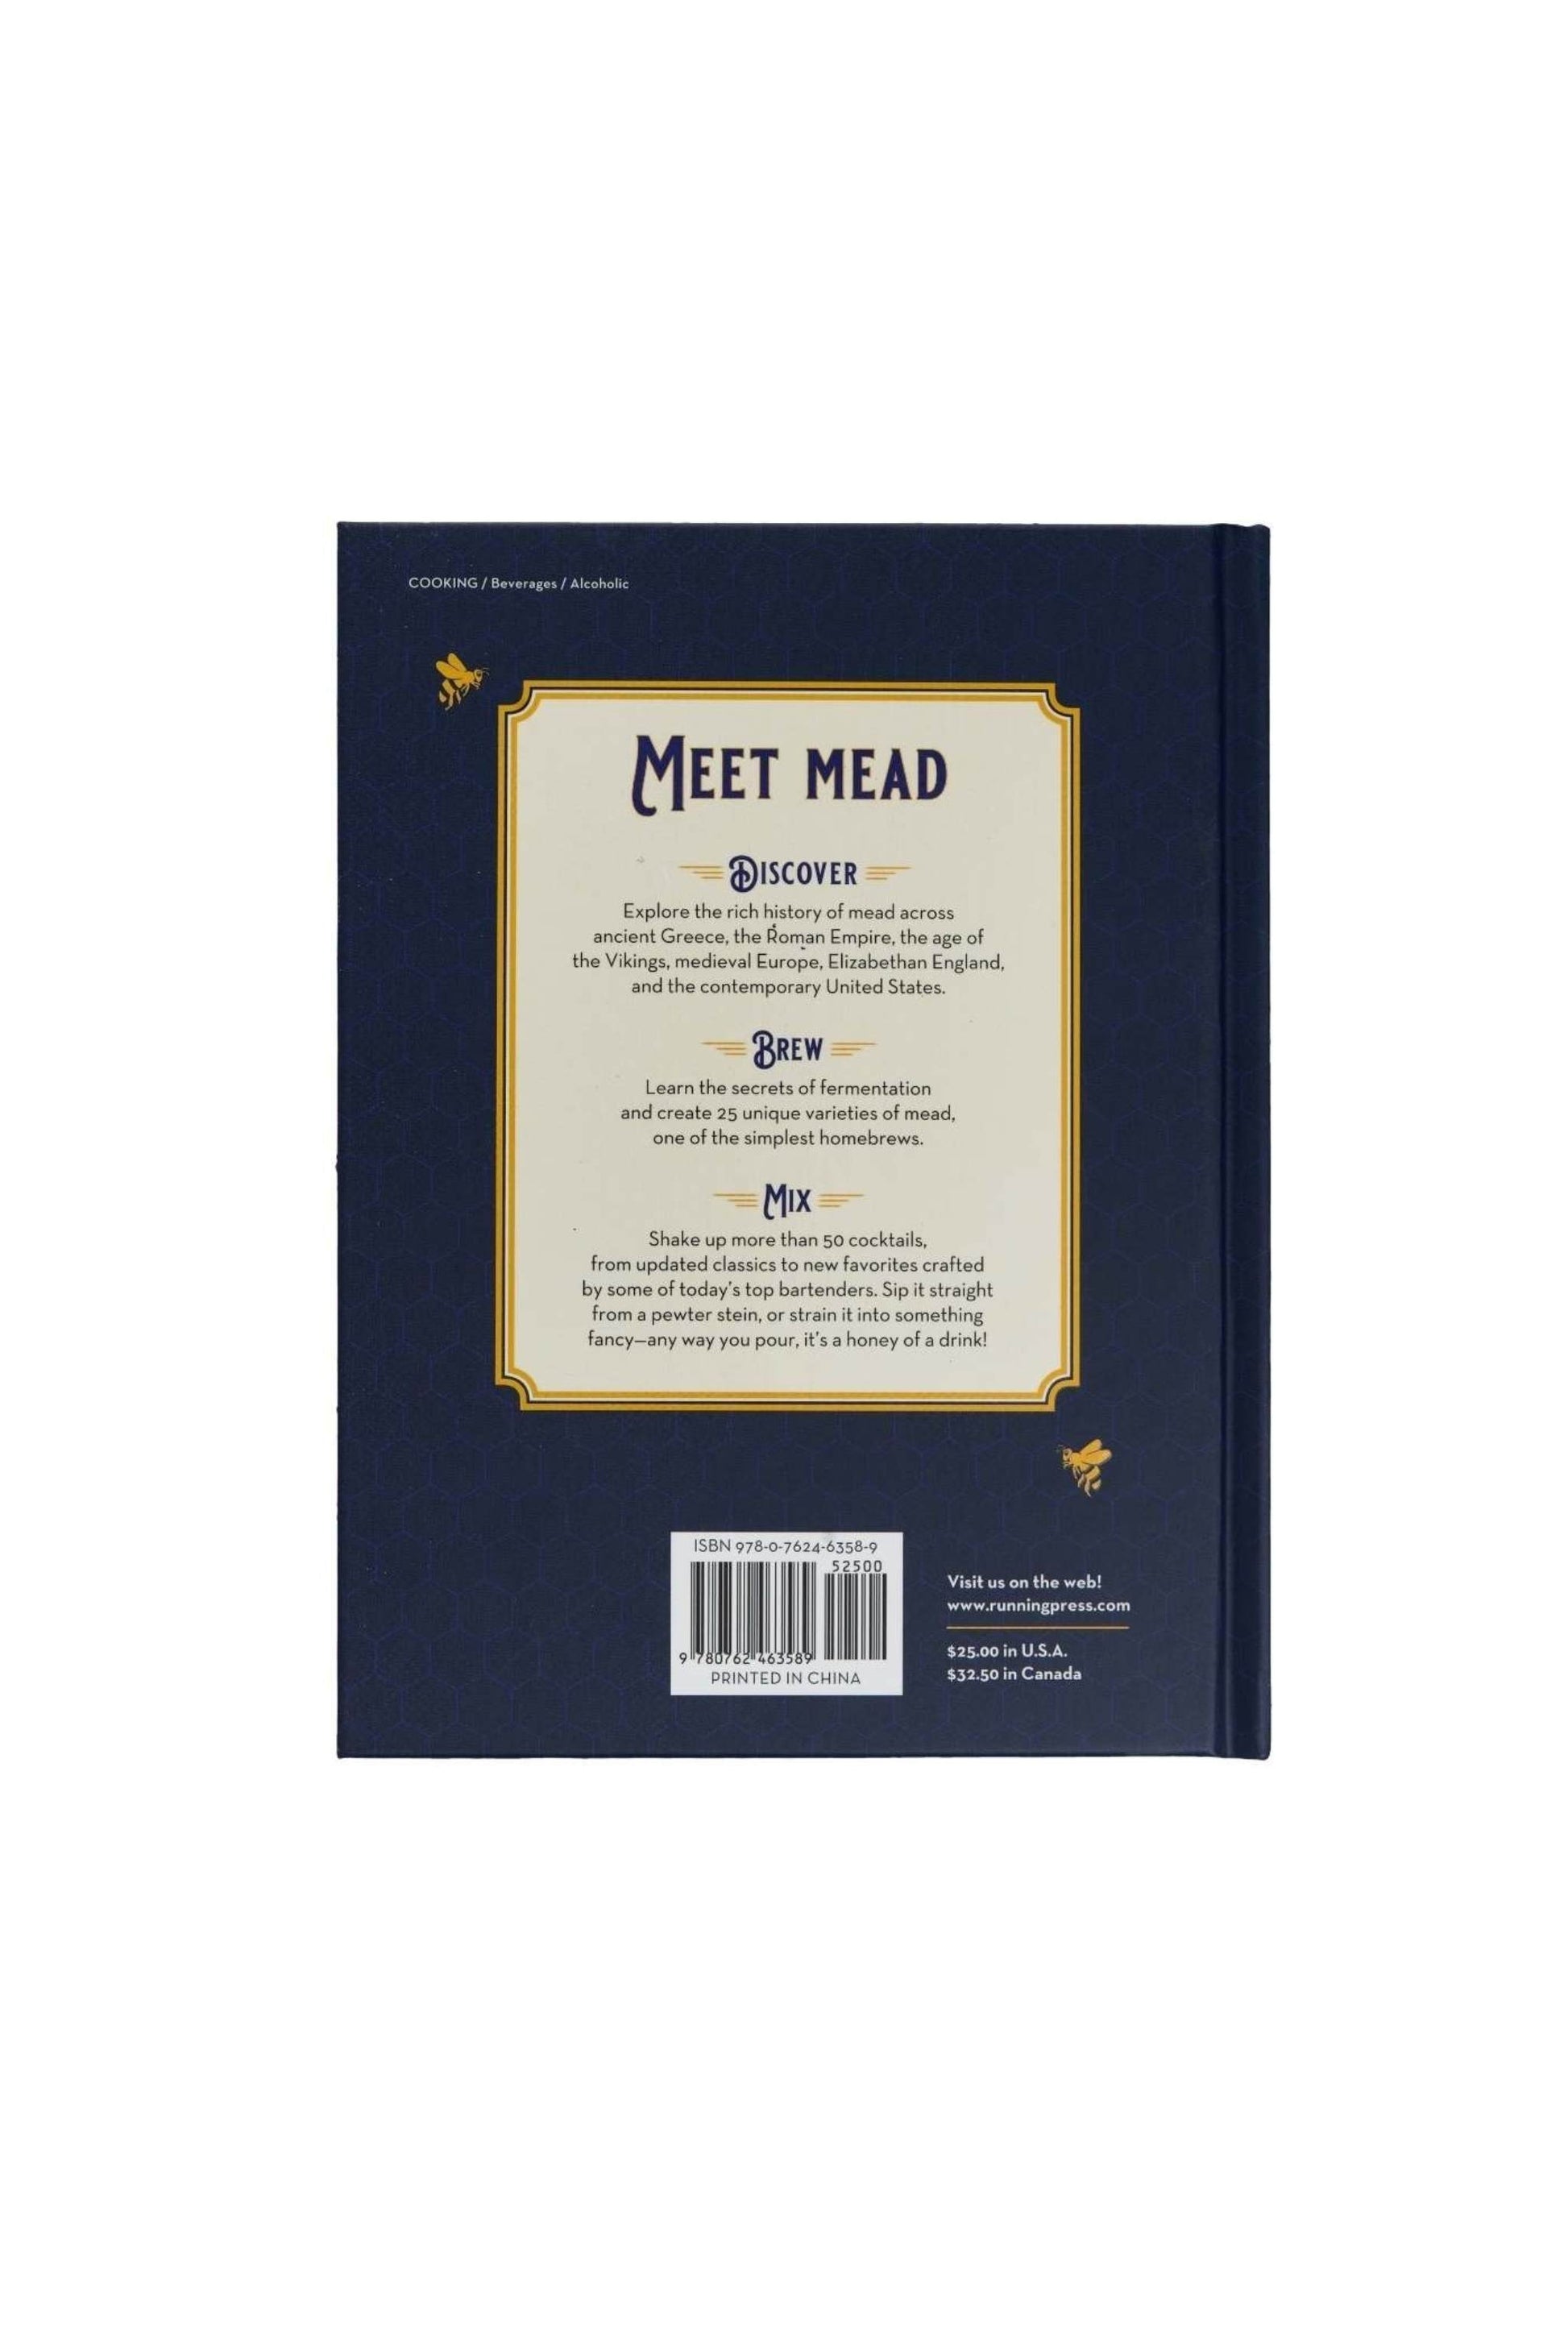 Mead: The Libations, Legends, and Lore of History's Oldest Drink back cover